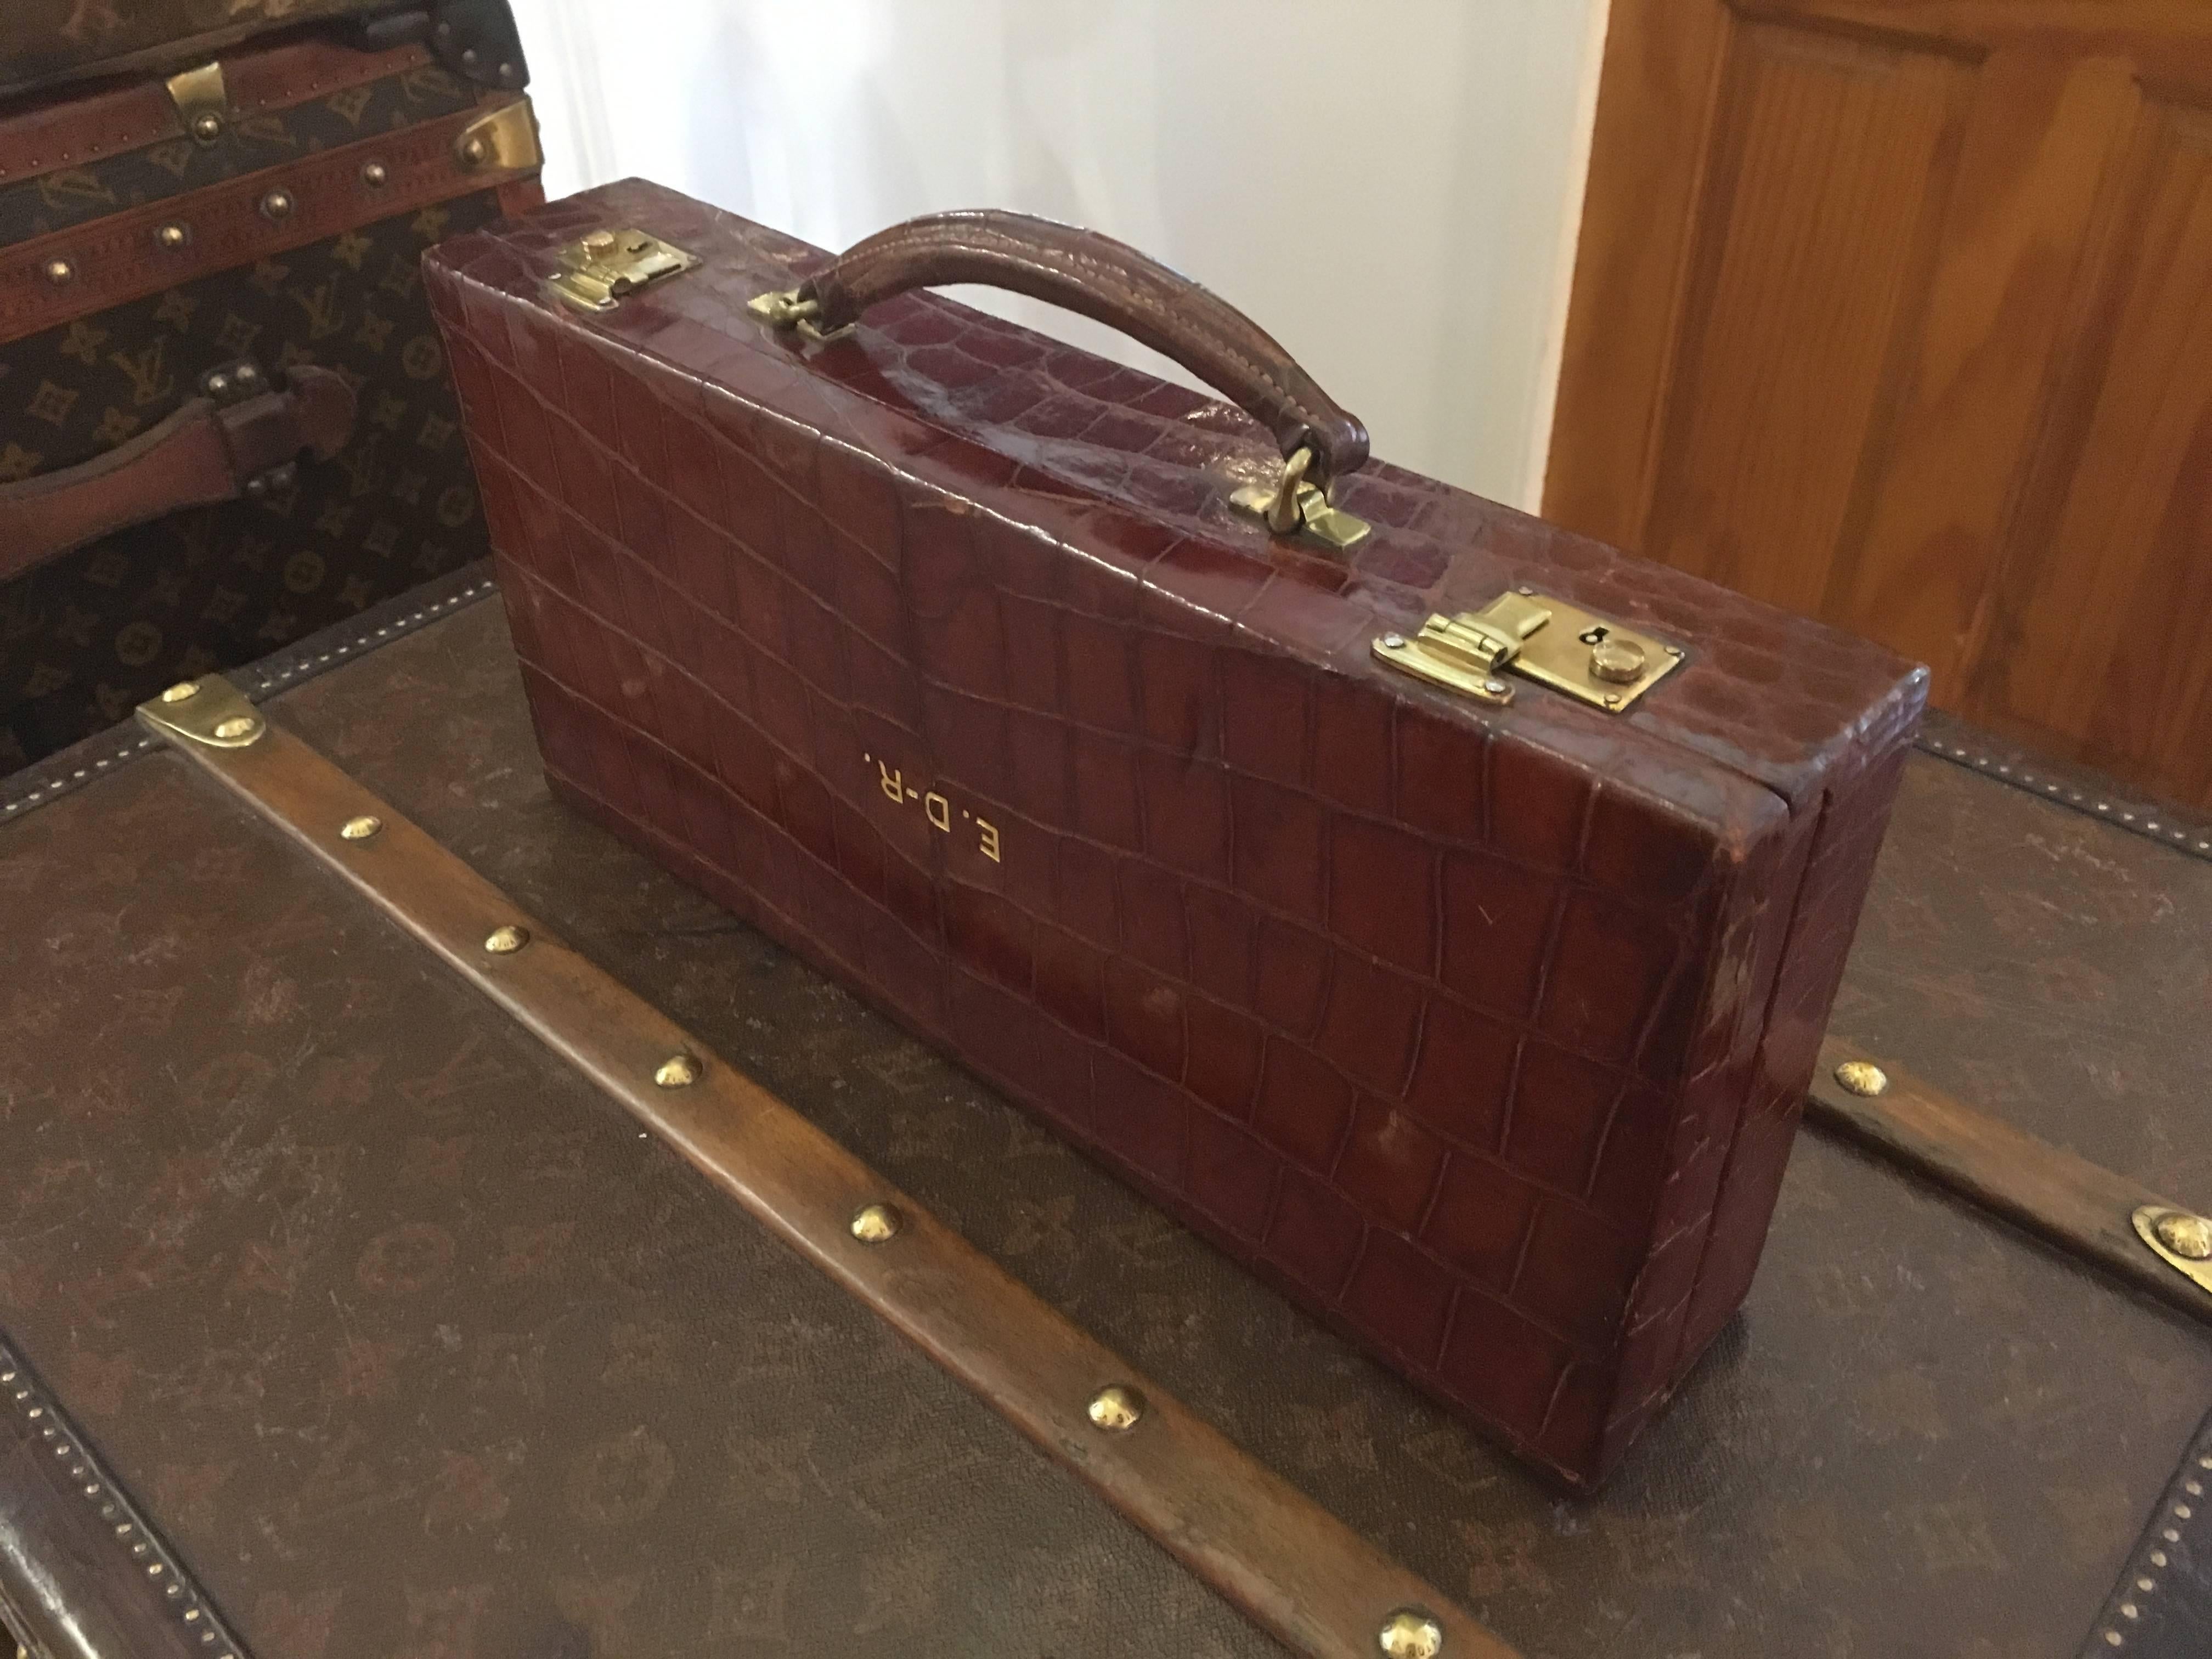 Edwardian Asprey & Co. Crocodile Skin Cantilever Travelling Jewelery Box In Excellent Condition For Sale In London, GB